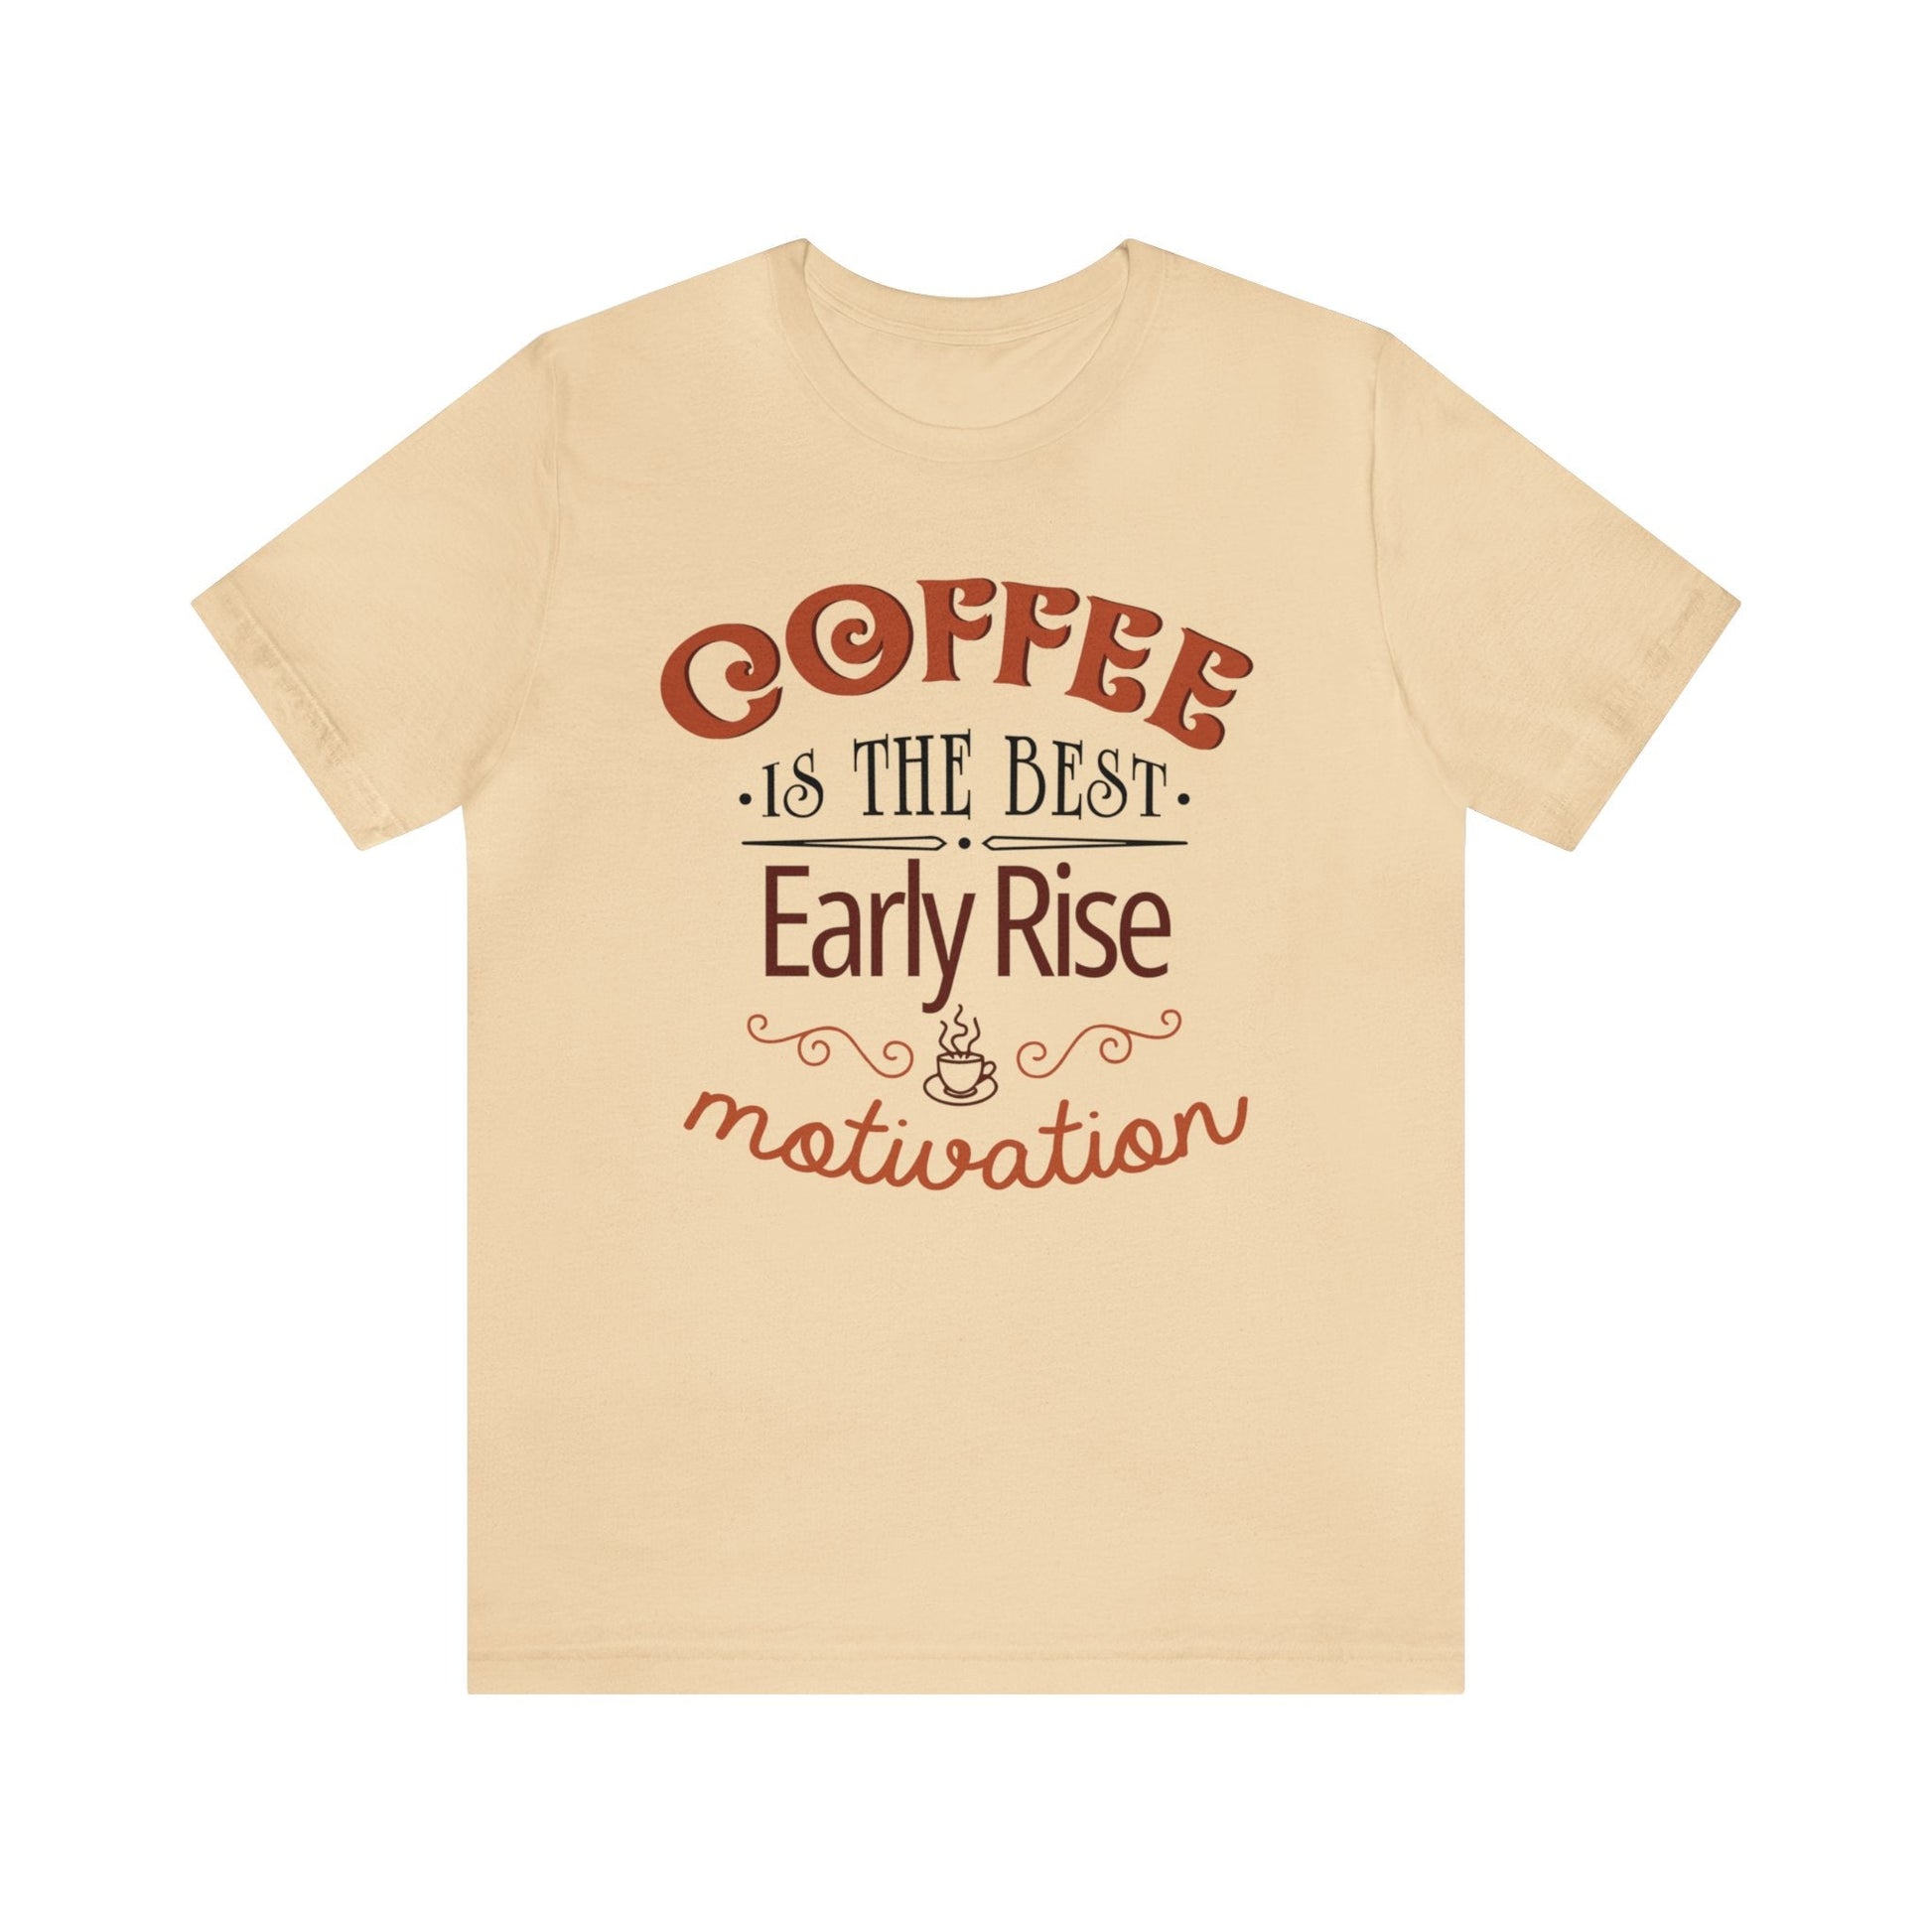 Coffee is the best Early rise motivation T-shirt - InkArt Fashions